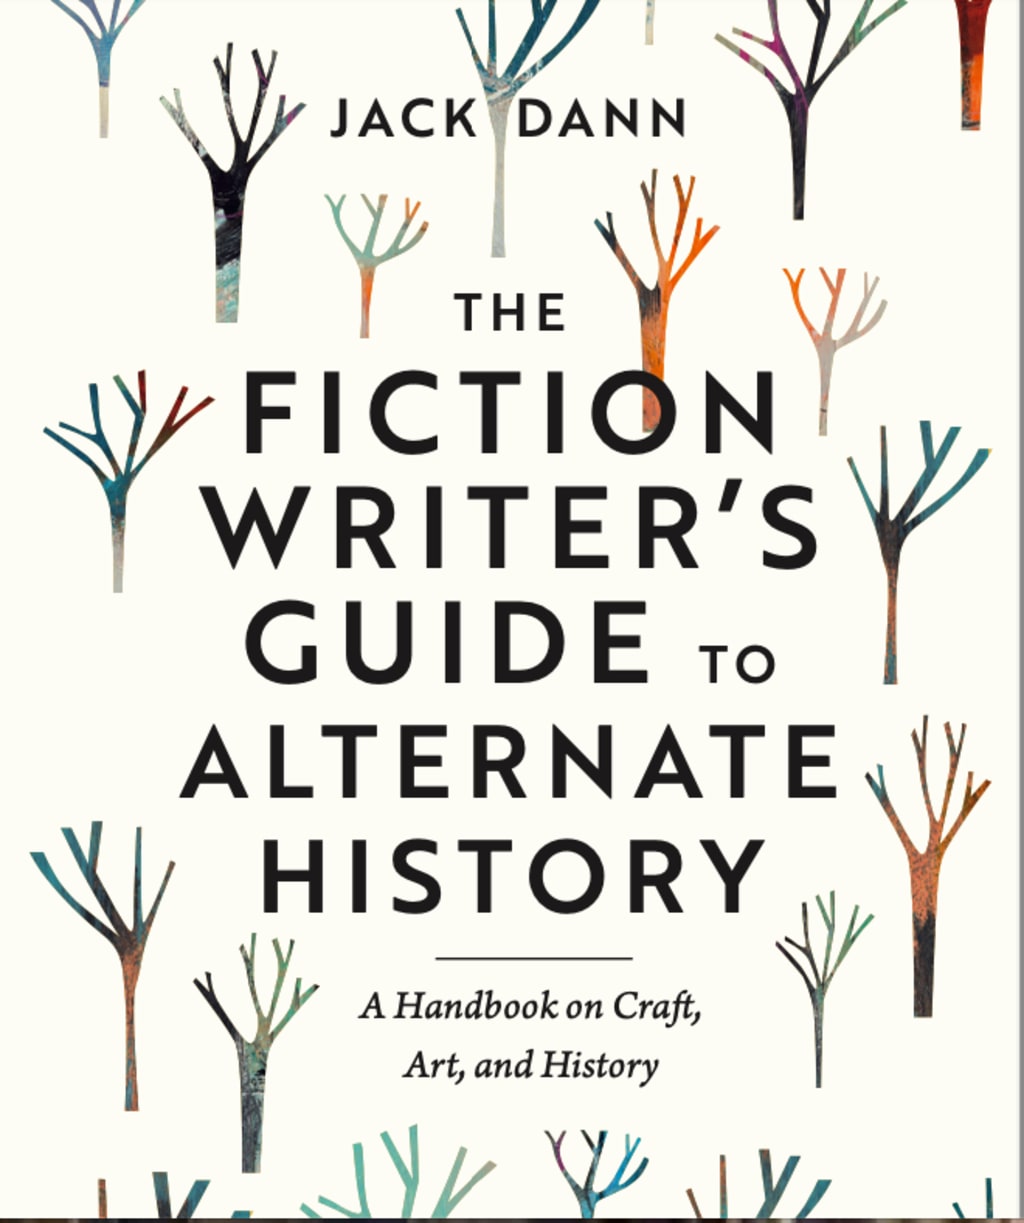 Review of Jack Dann’s The Fiction Writer’s Guide to Alternate History